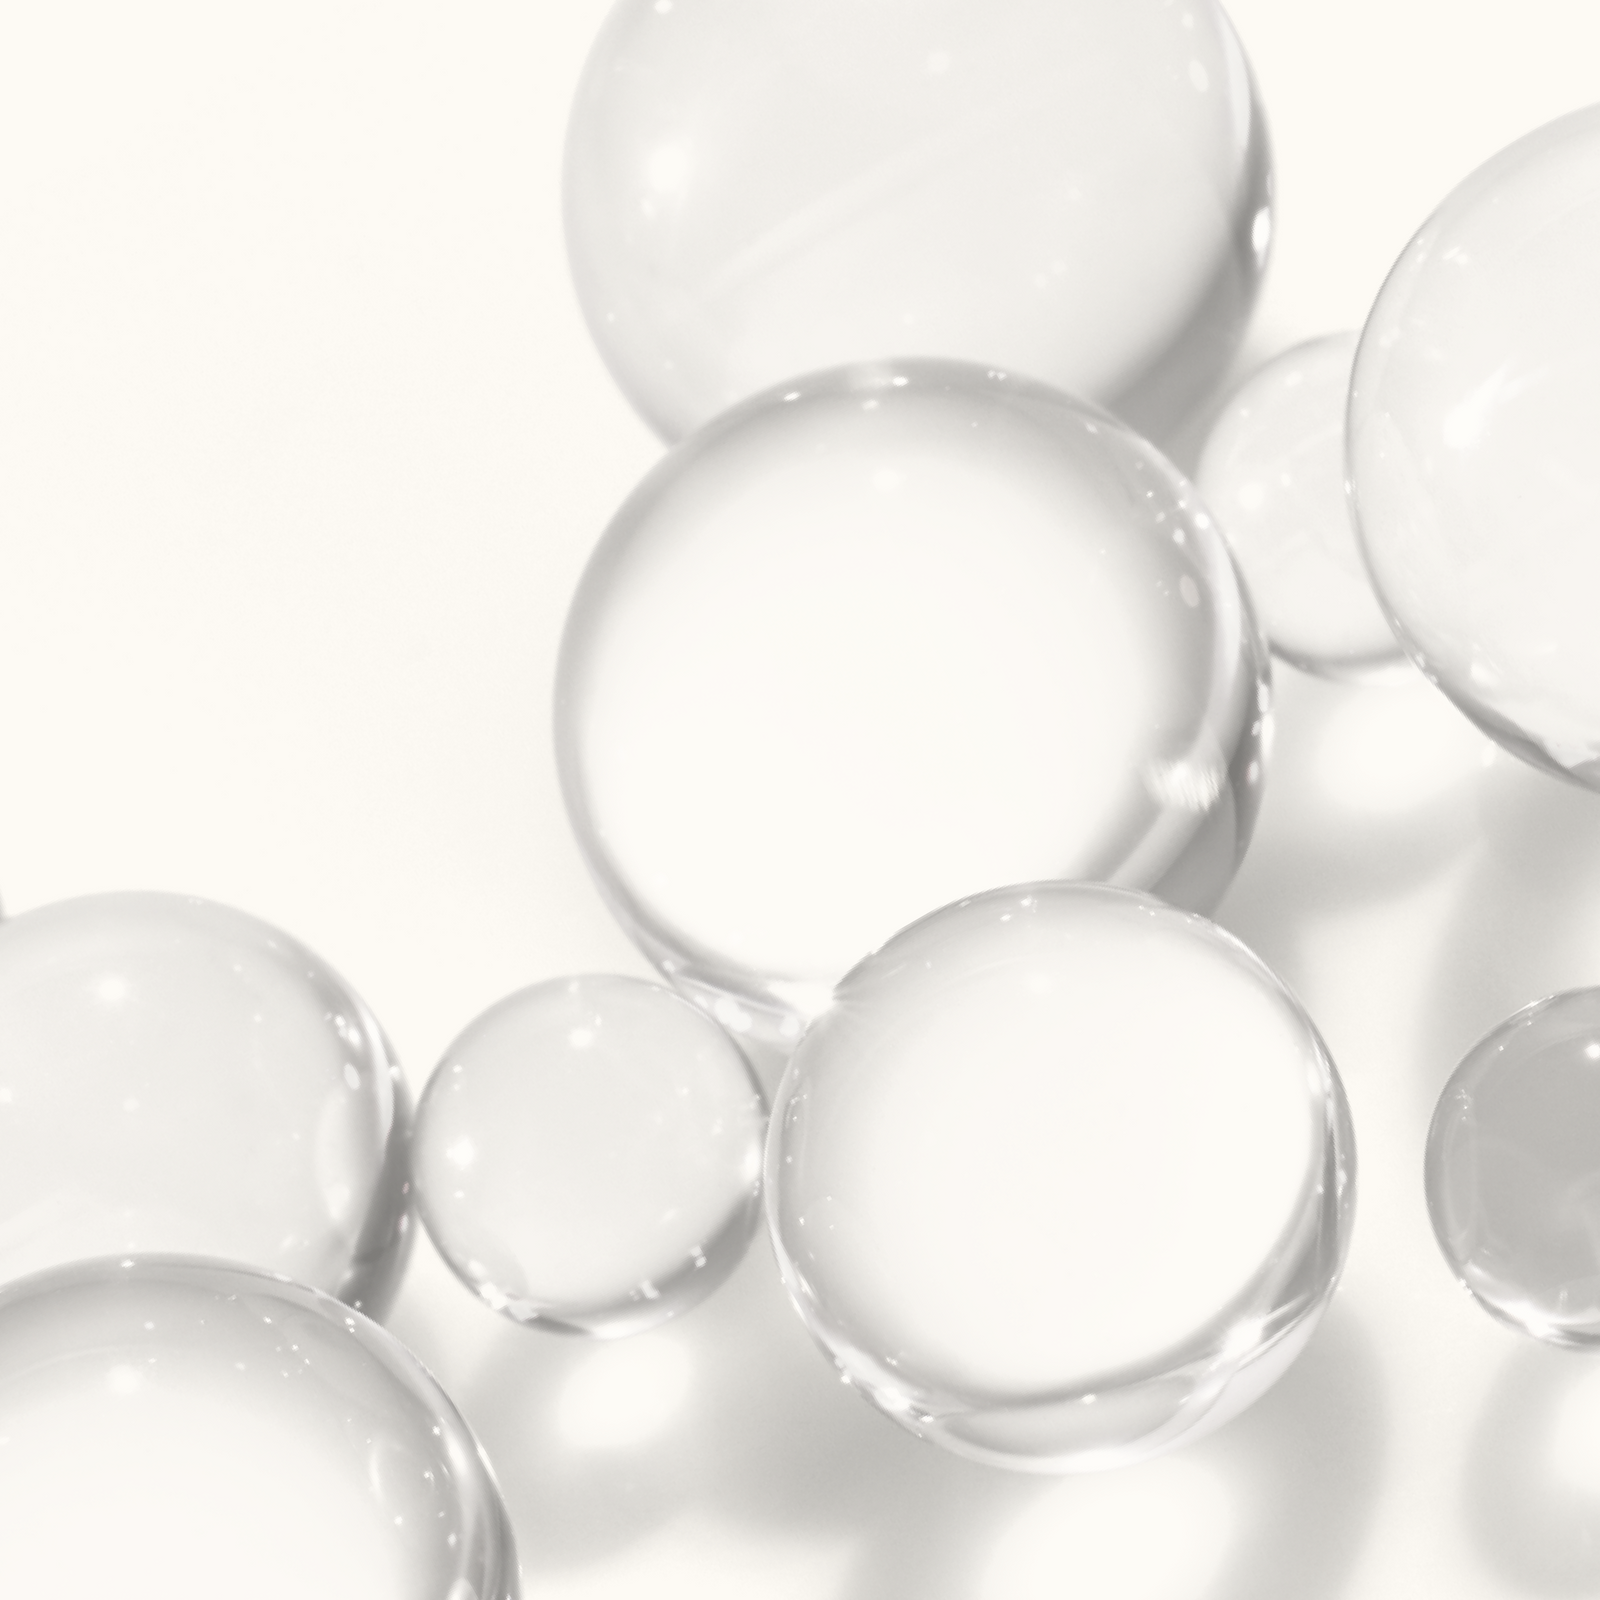 What Is a Peptide Bond in Skincare?